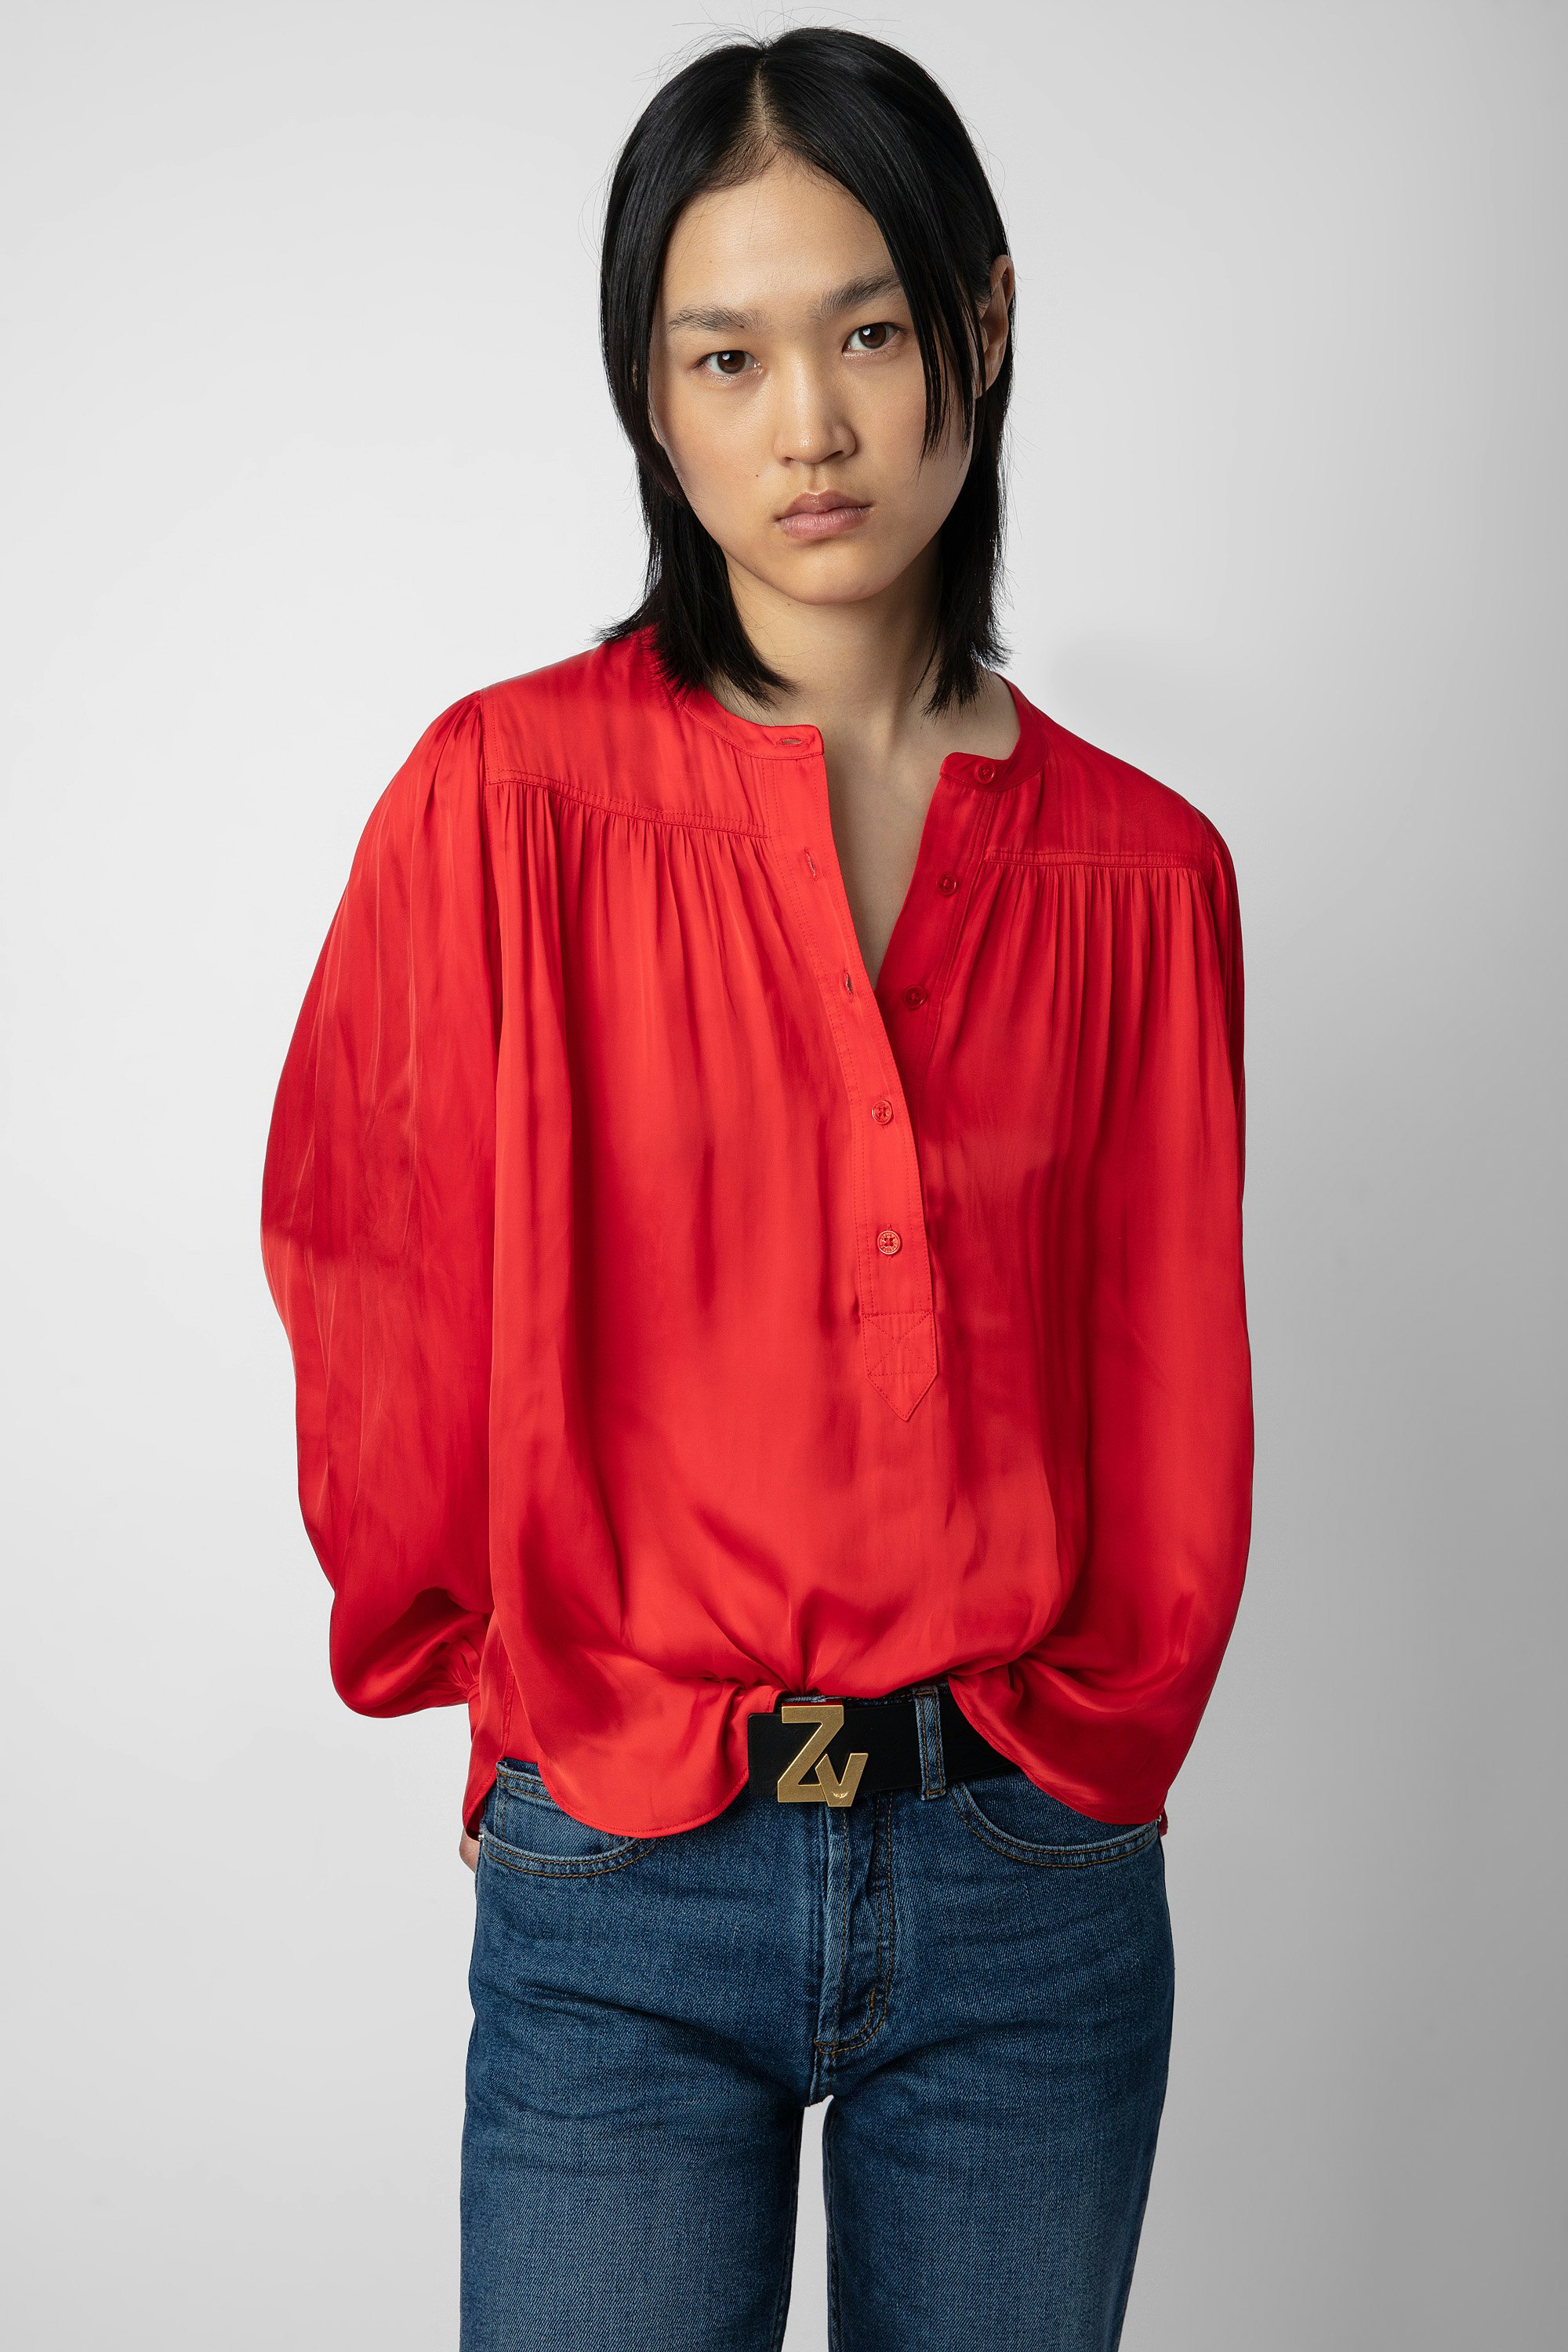 Tigy Satin Blouse - Women’s red satin blouse with gathers and buttons